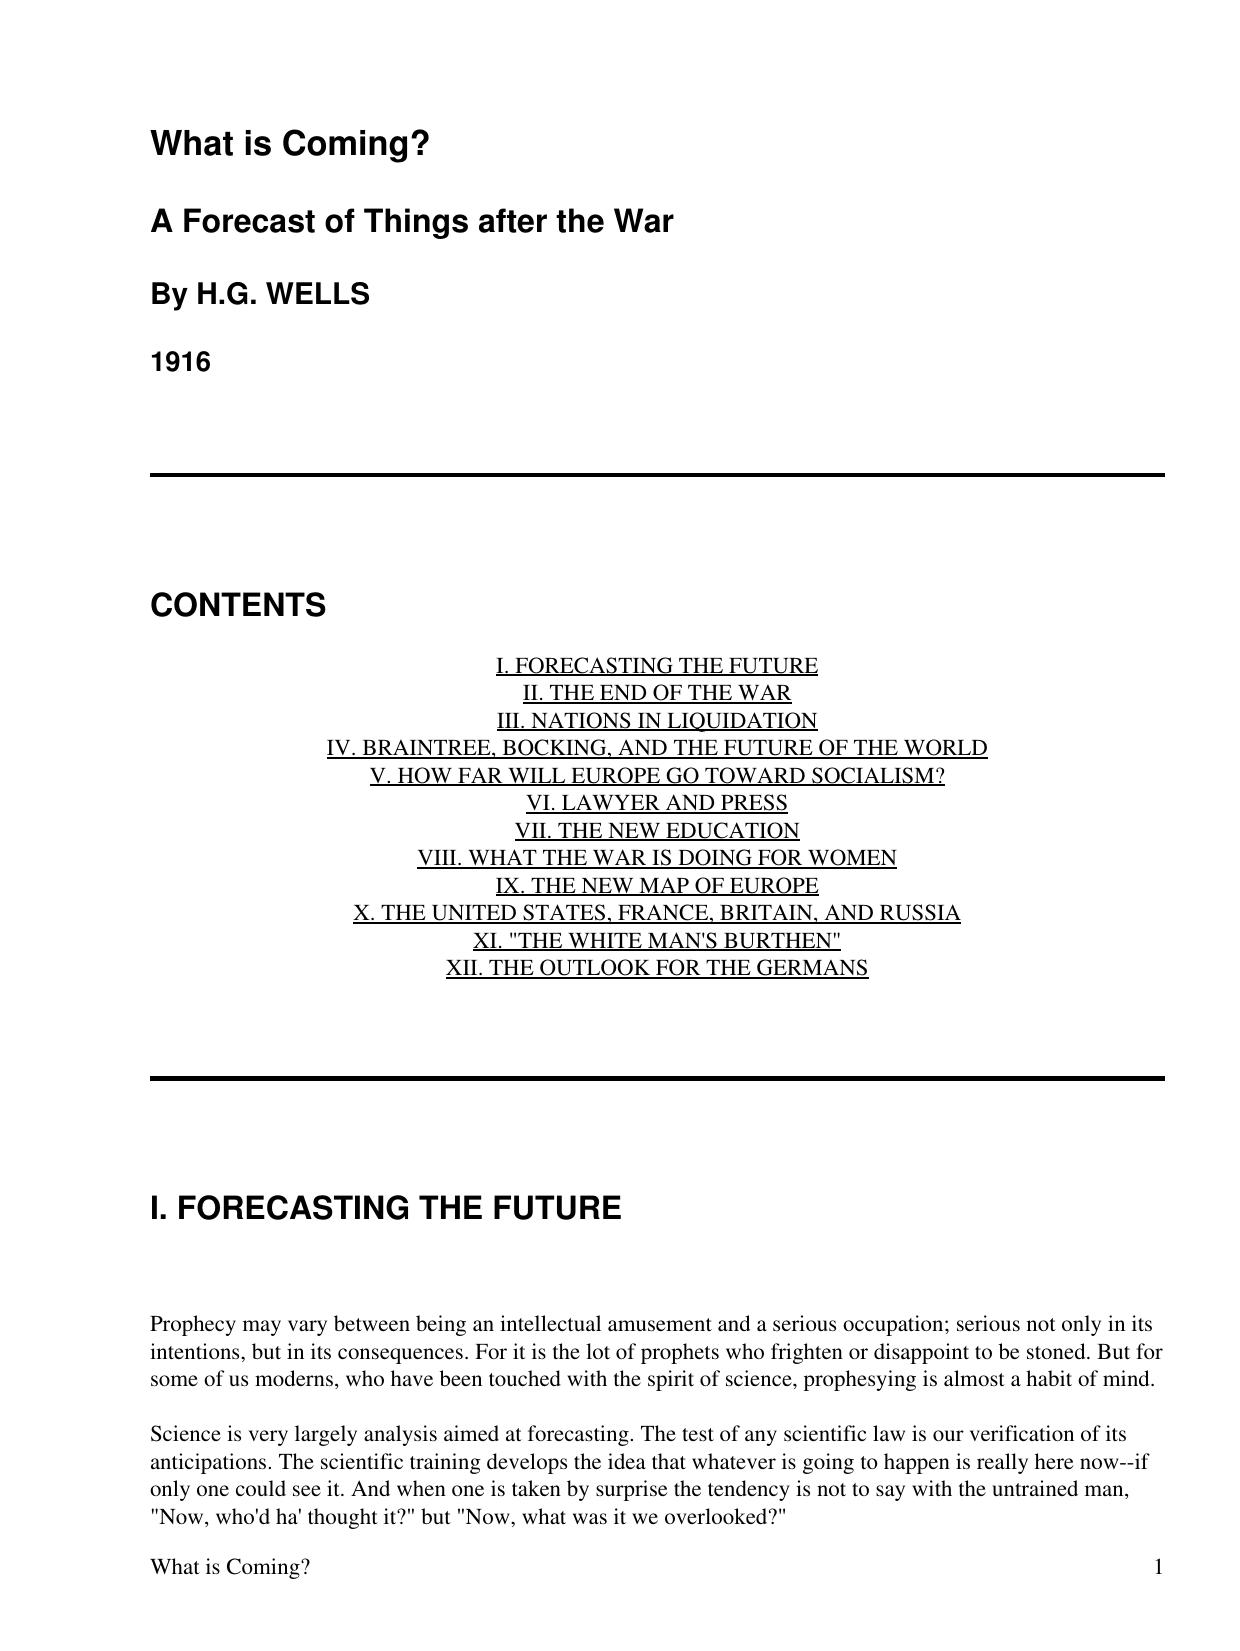 What Is Coming? A Forecast of Things After the War: Original Text